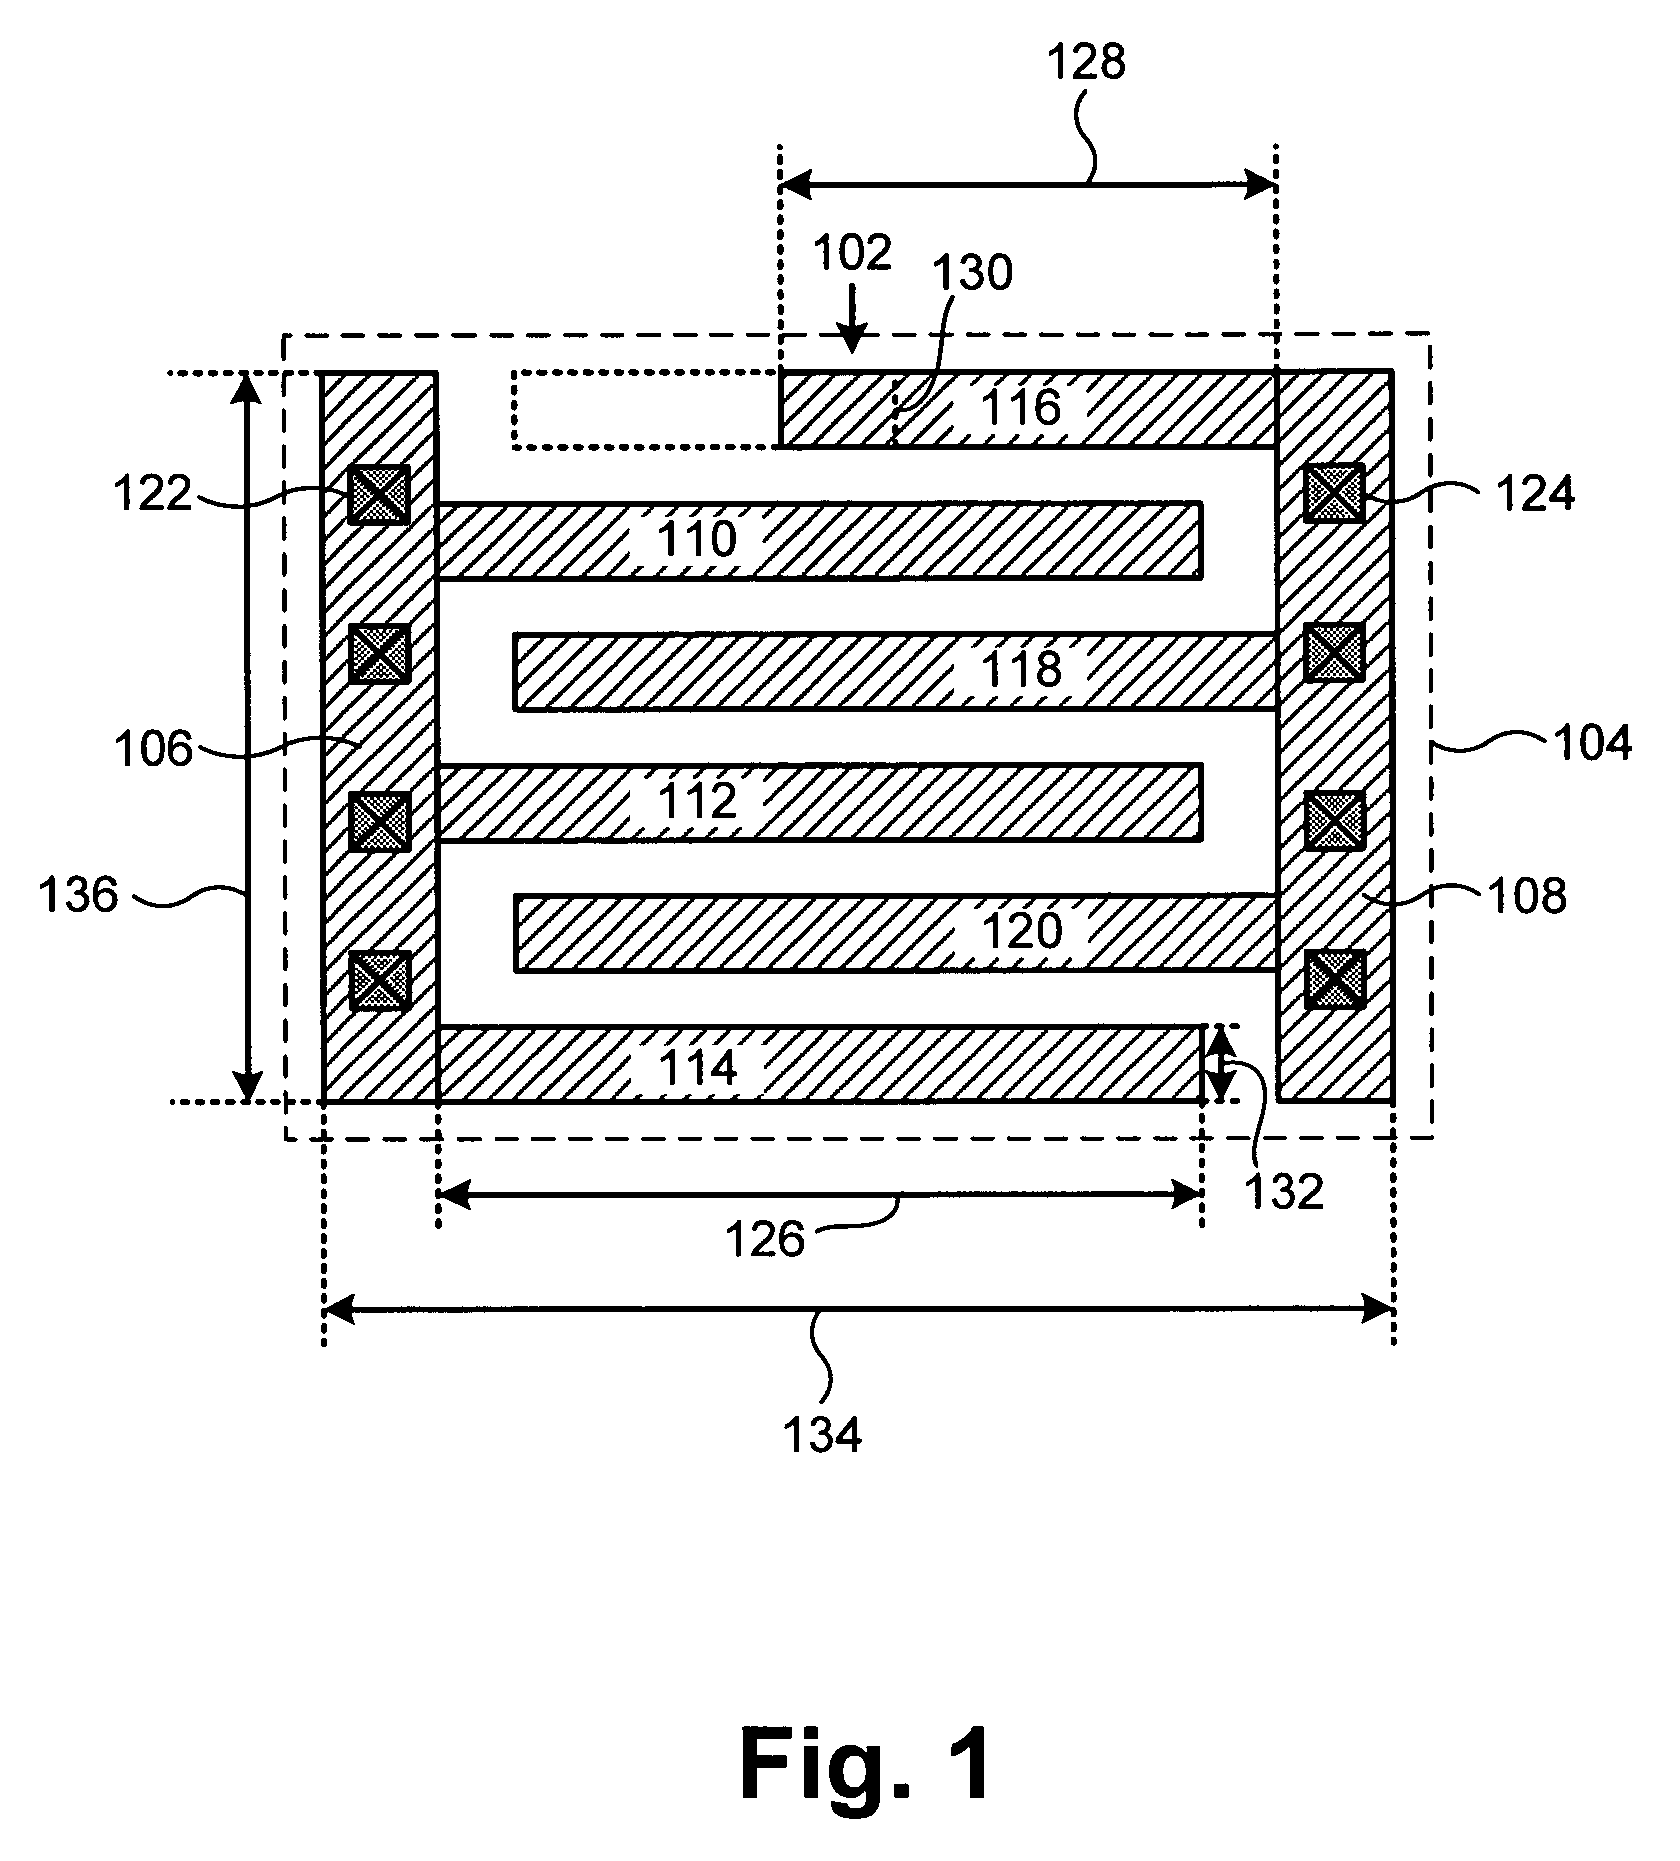 Method for adjusting capacitance of capacitors without affecting die area